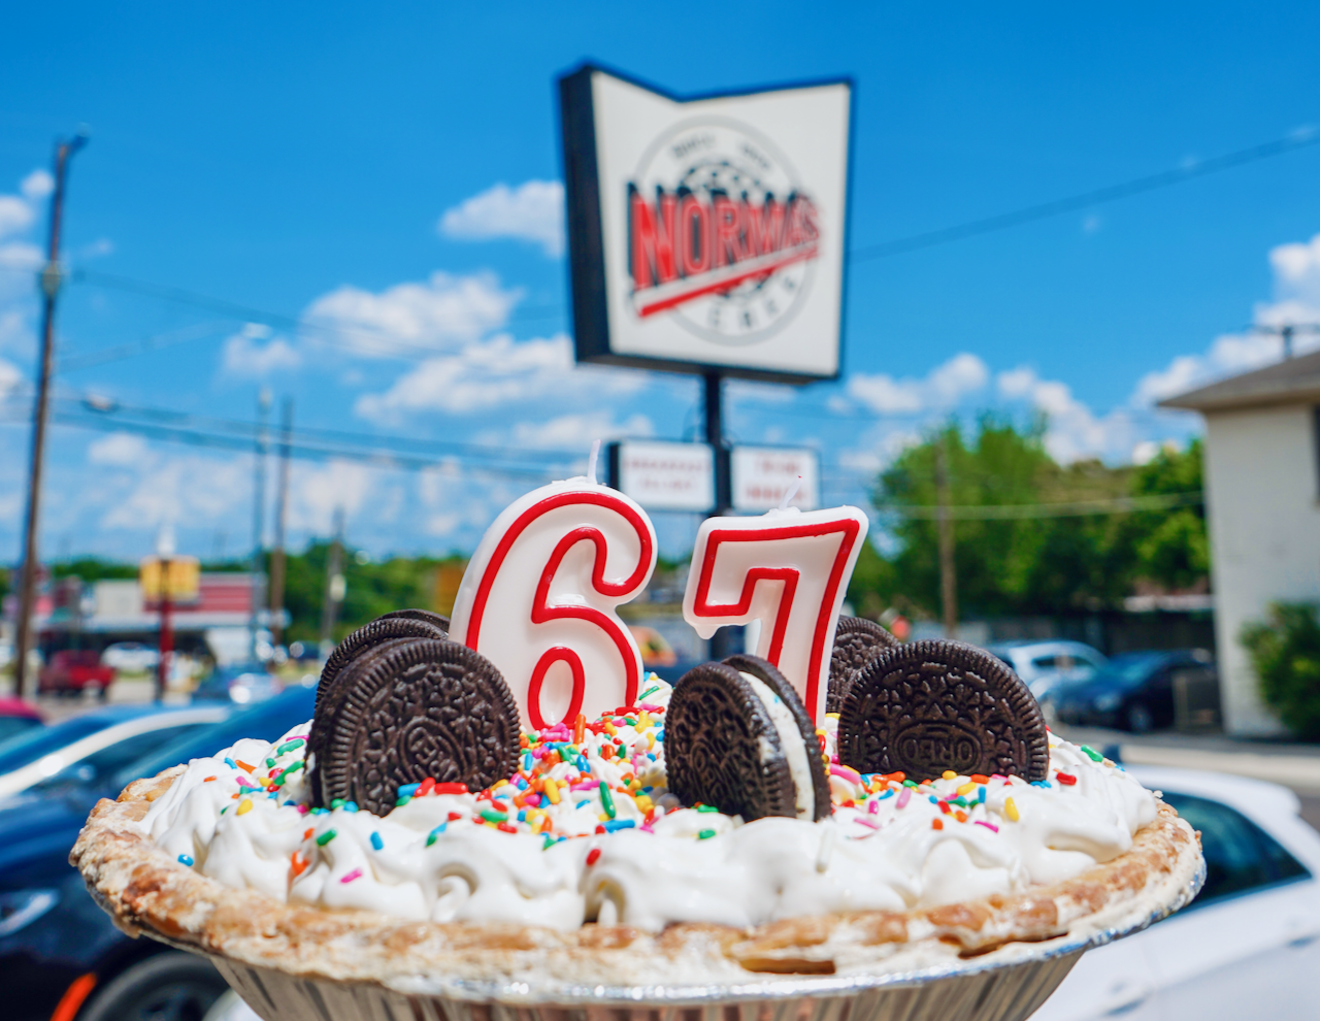 Norma's celebrates 67 years with pie and chicken-fried steak on Wednesday.